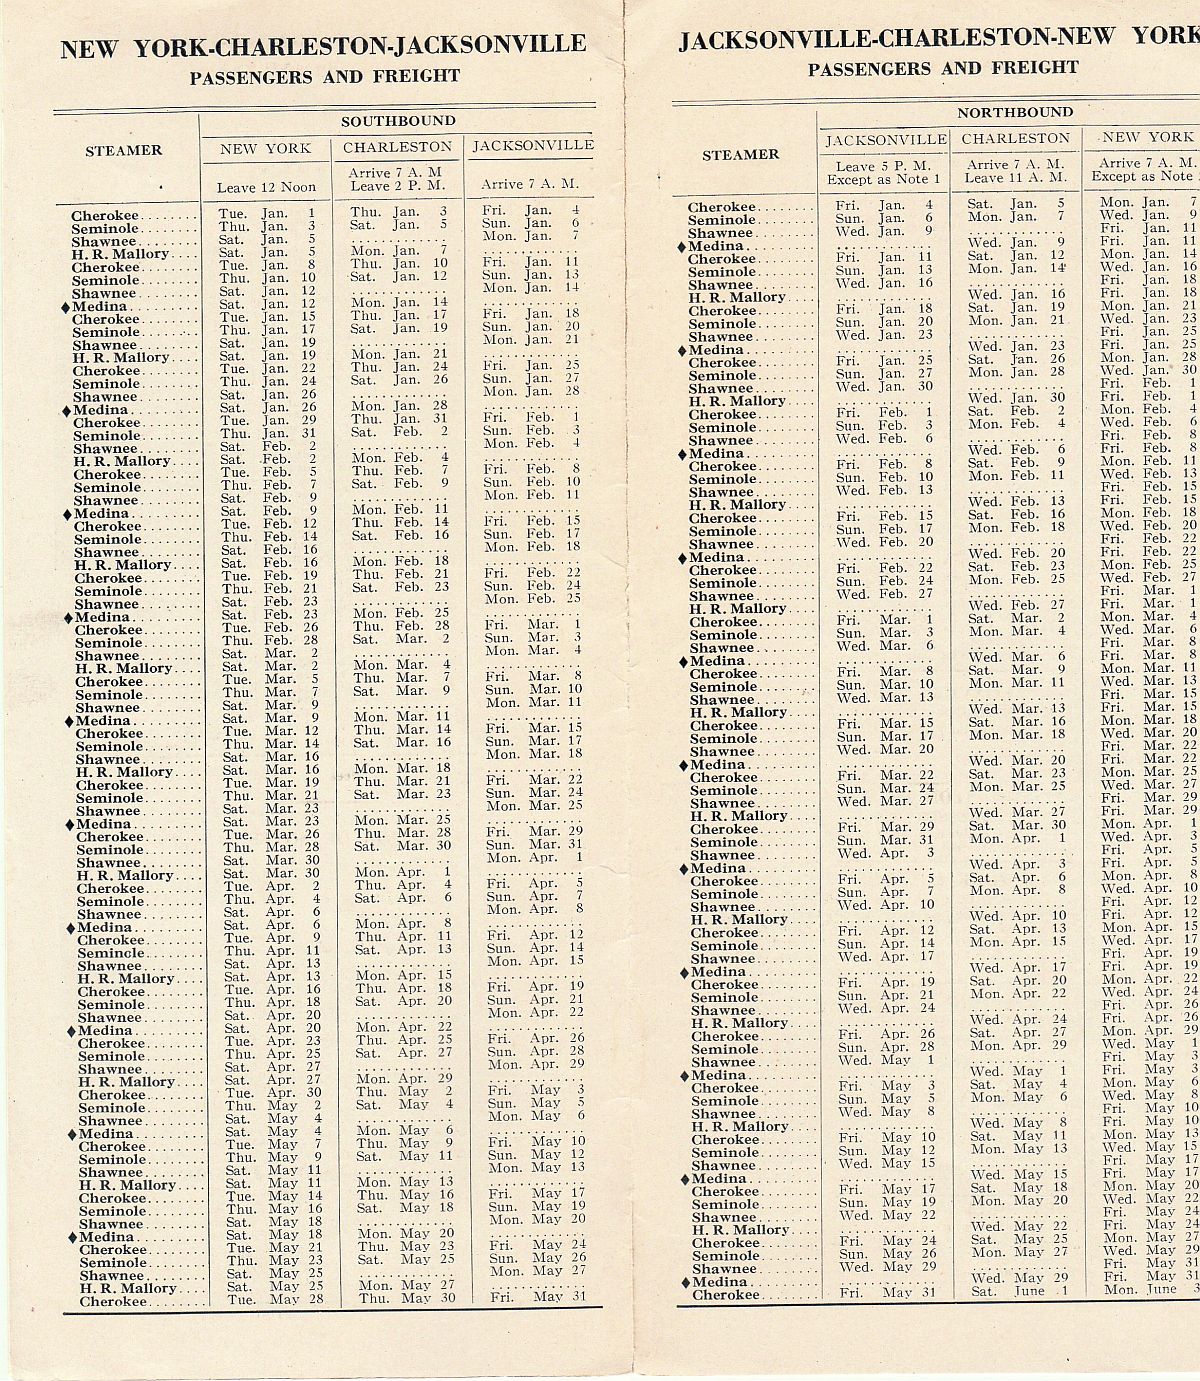 Clyde-Mallory Lines Sailing Schedule: New York - Charleston - Jacksonville, southbound and northbound passengers and freight